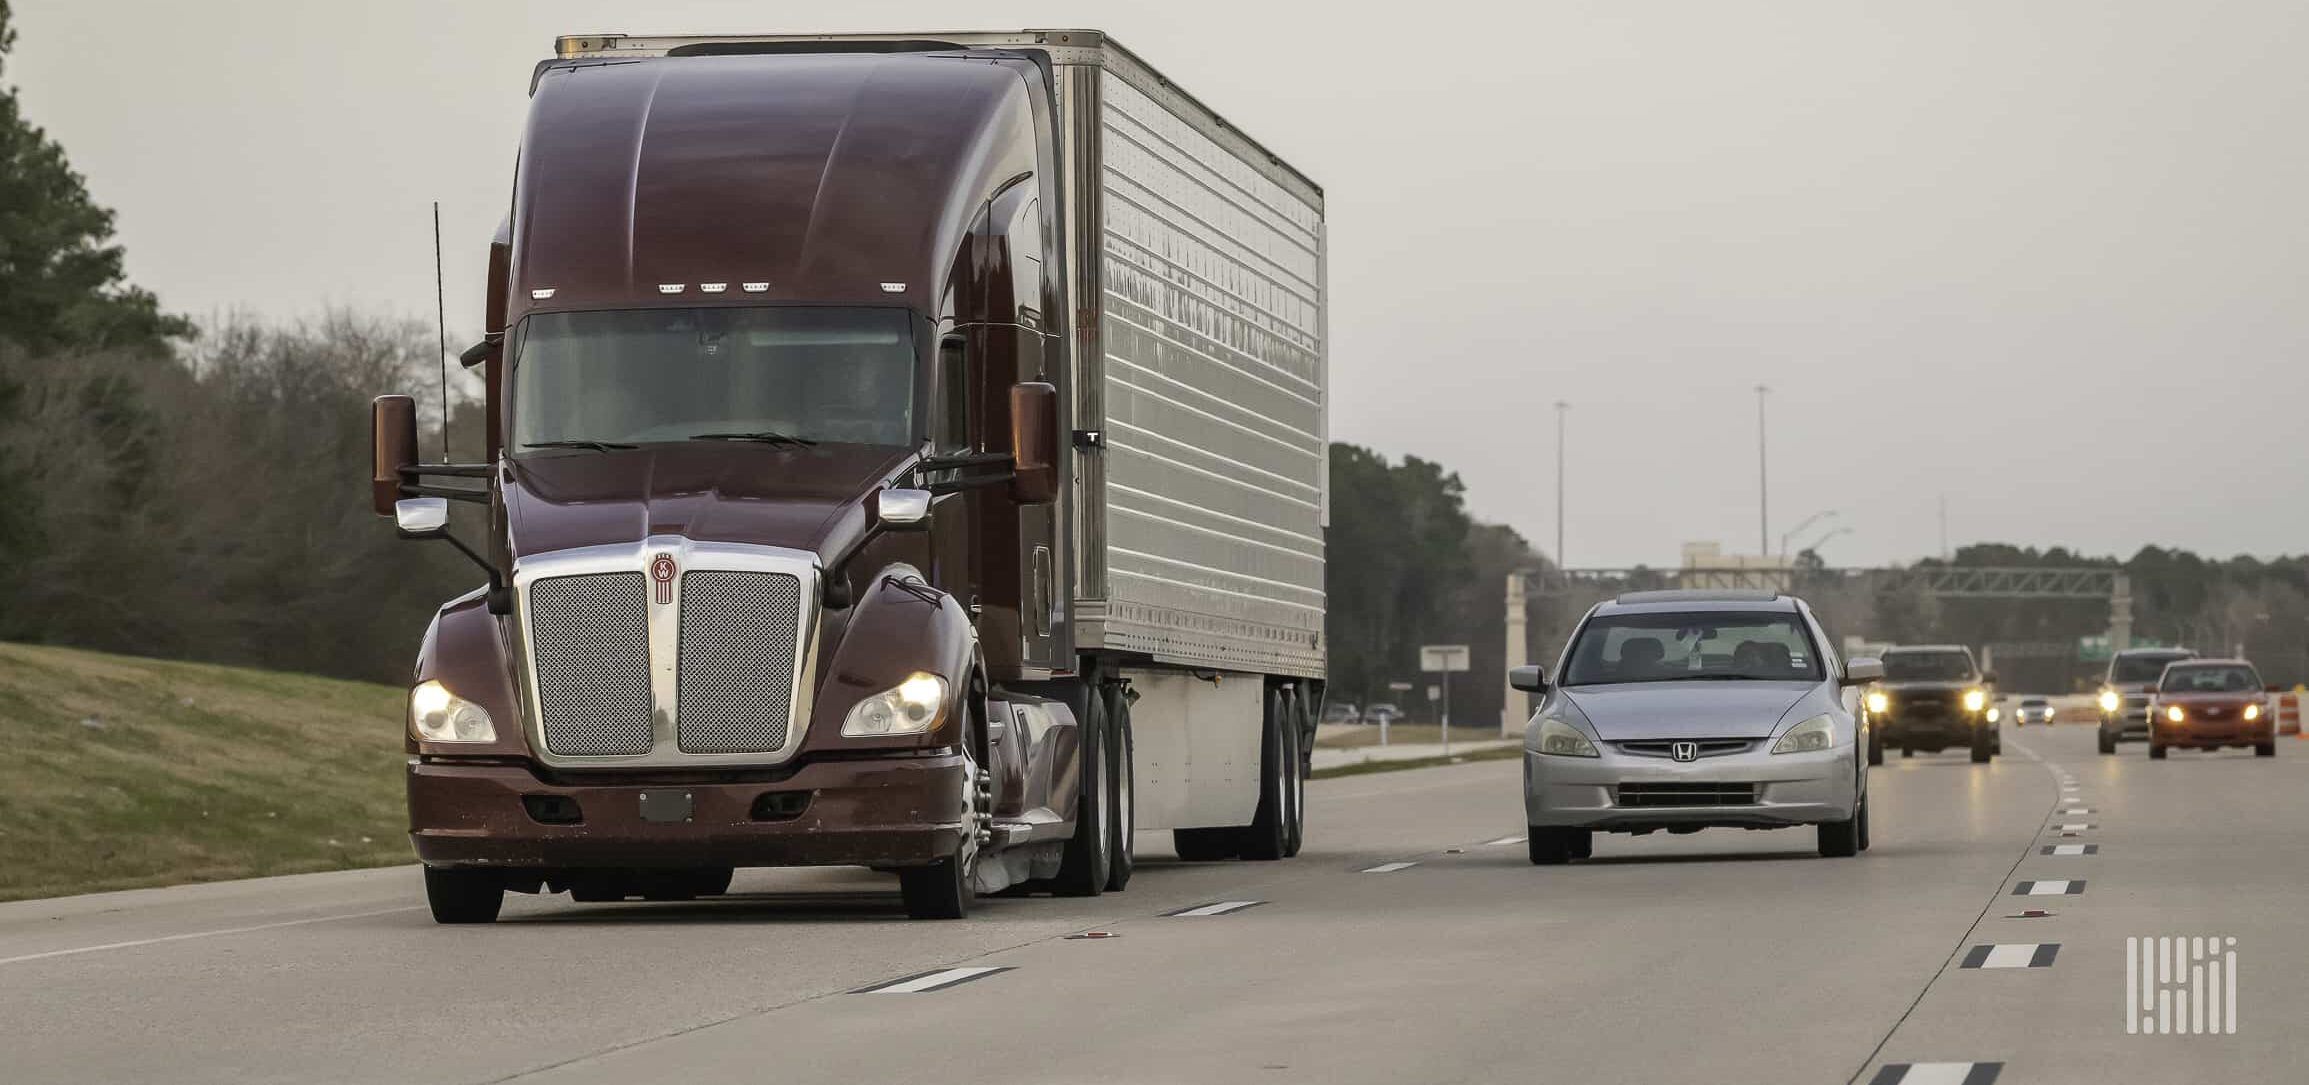 FMCSA Insurance Requirements for Commercial Vehicles